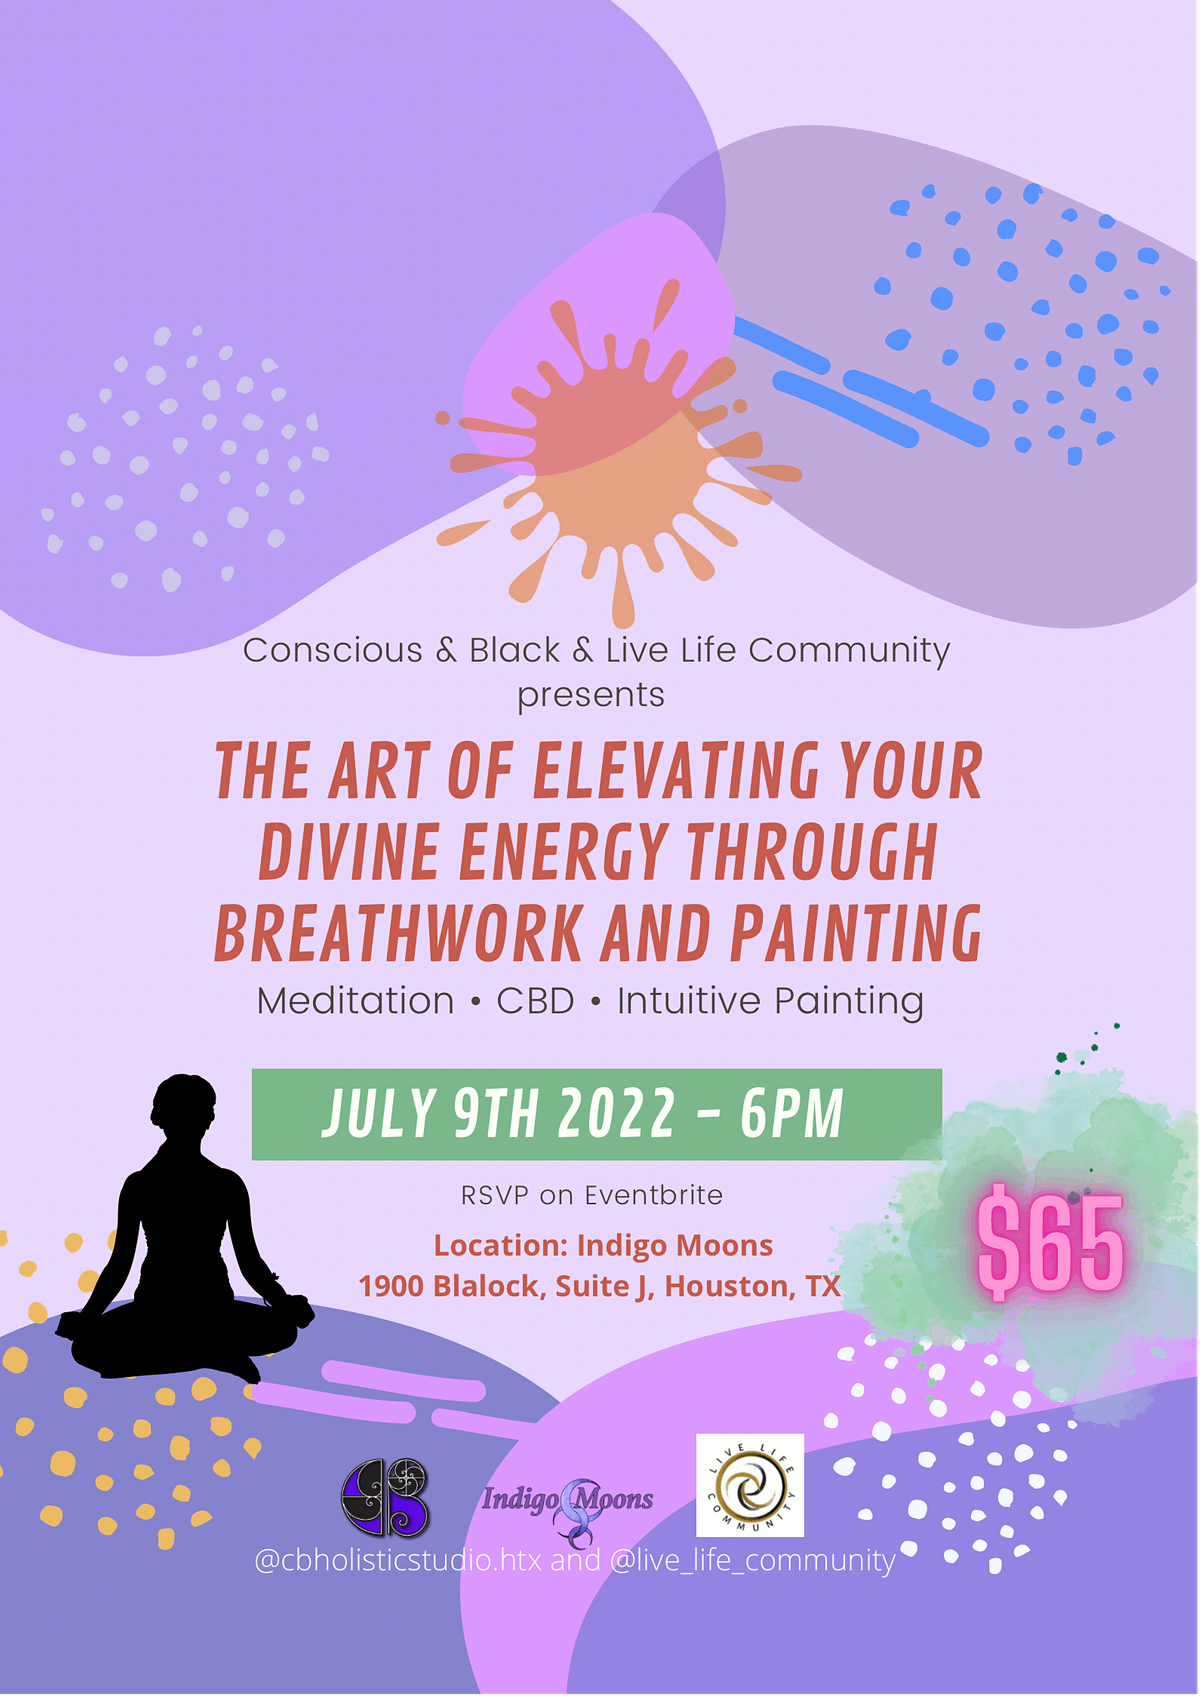 The Art of Elevating Your Divine Energy Through Breathwork and Painting